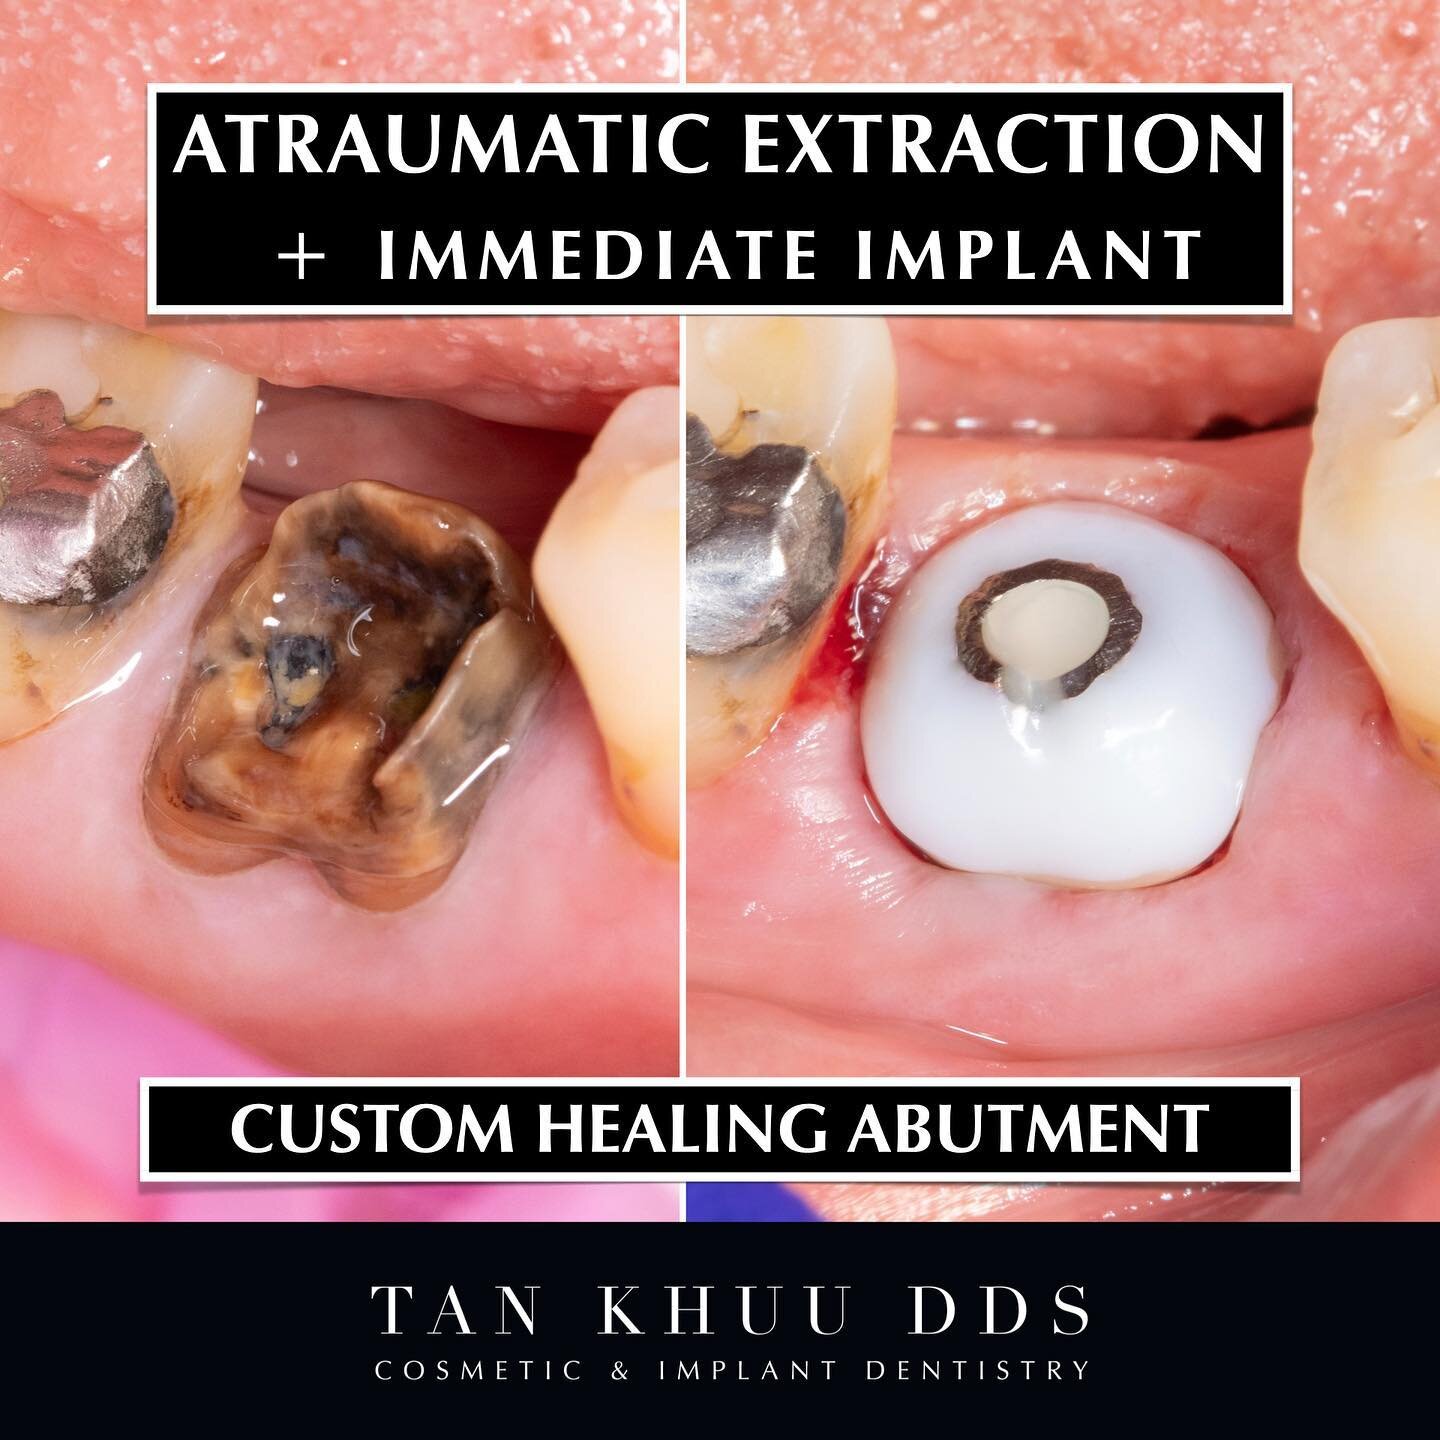 Extraction + Immediate Implant + Custom Healing Abutment

This tooth had a crown that failed years ago. It has been exposed to the oral cavity for too long and subsequently has a very poor prognosis. There was a large periapical lesion at the distal 